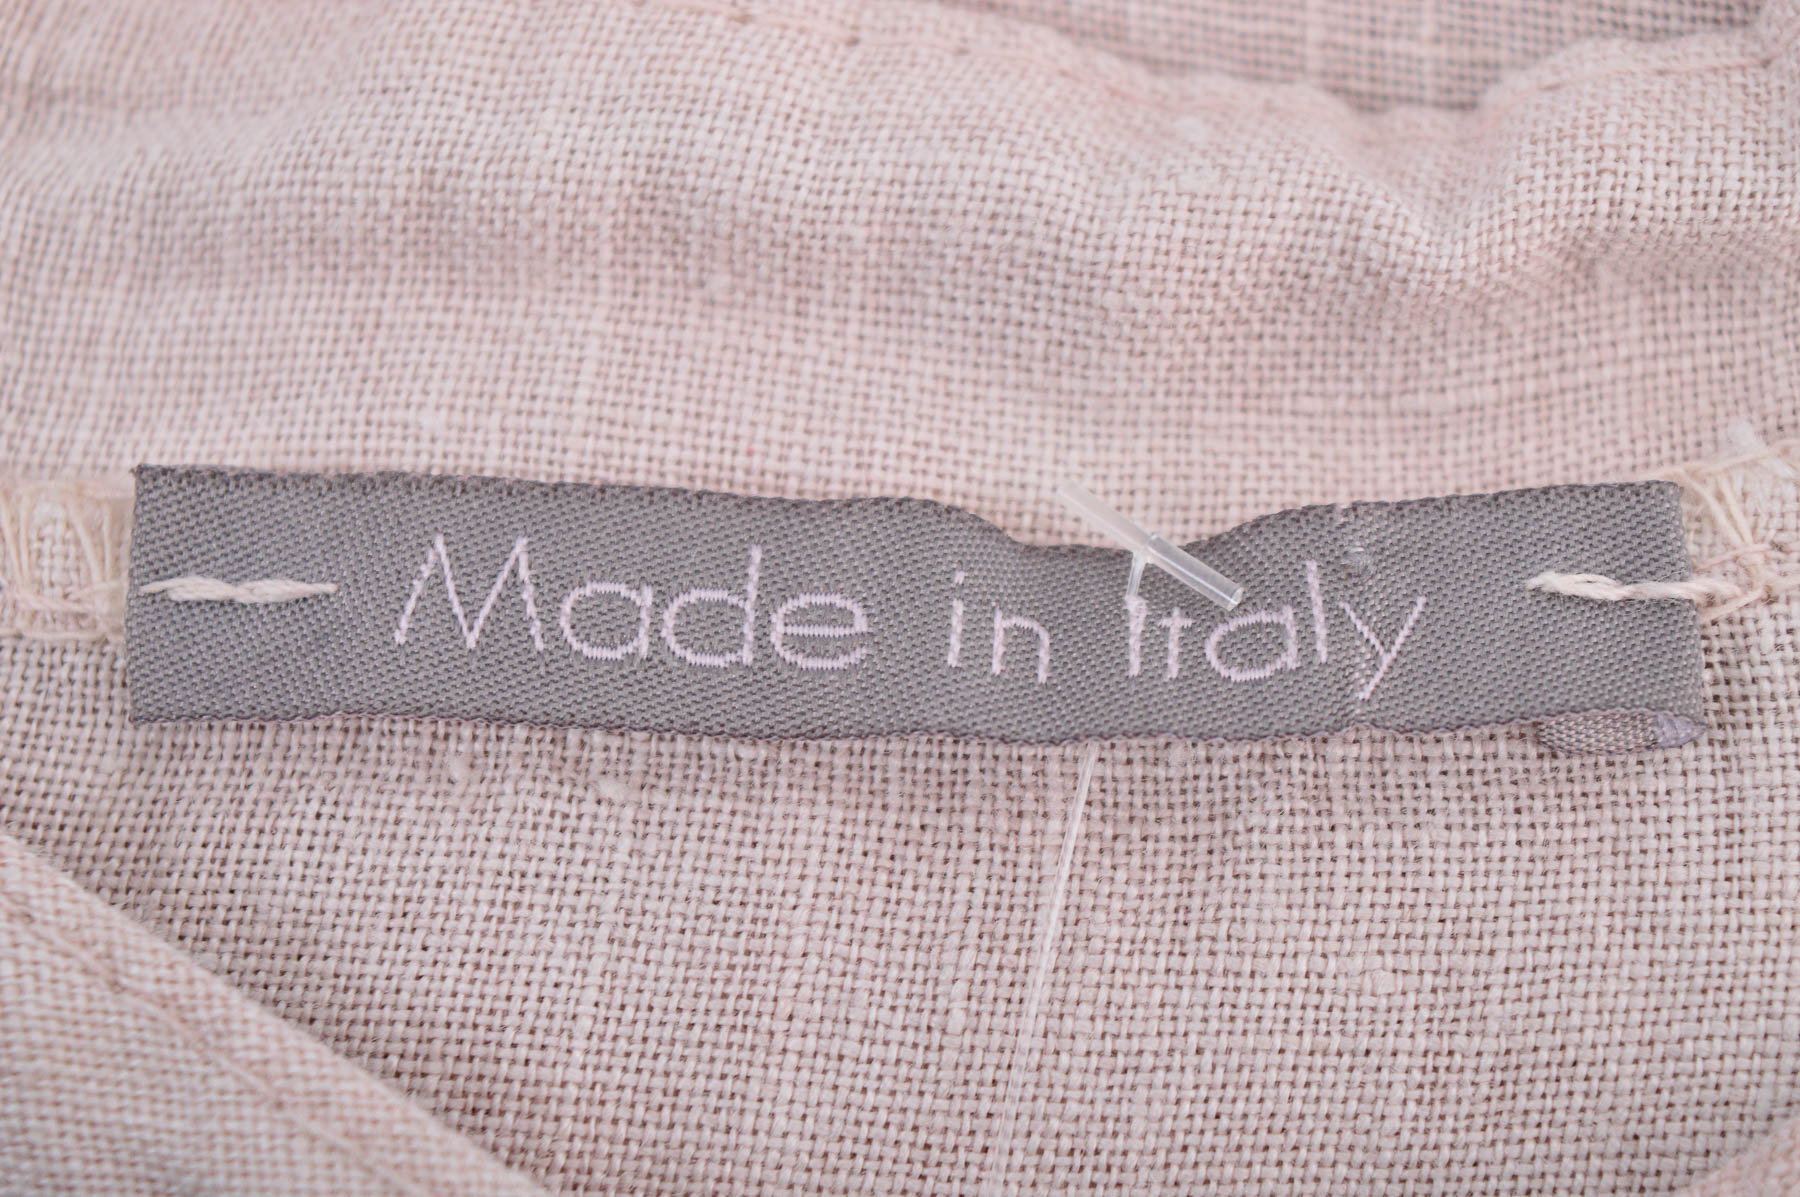 Women's shirt - Made in Italy - 2